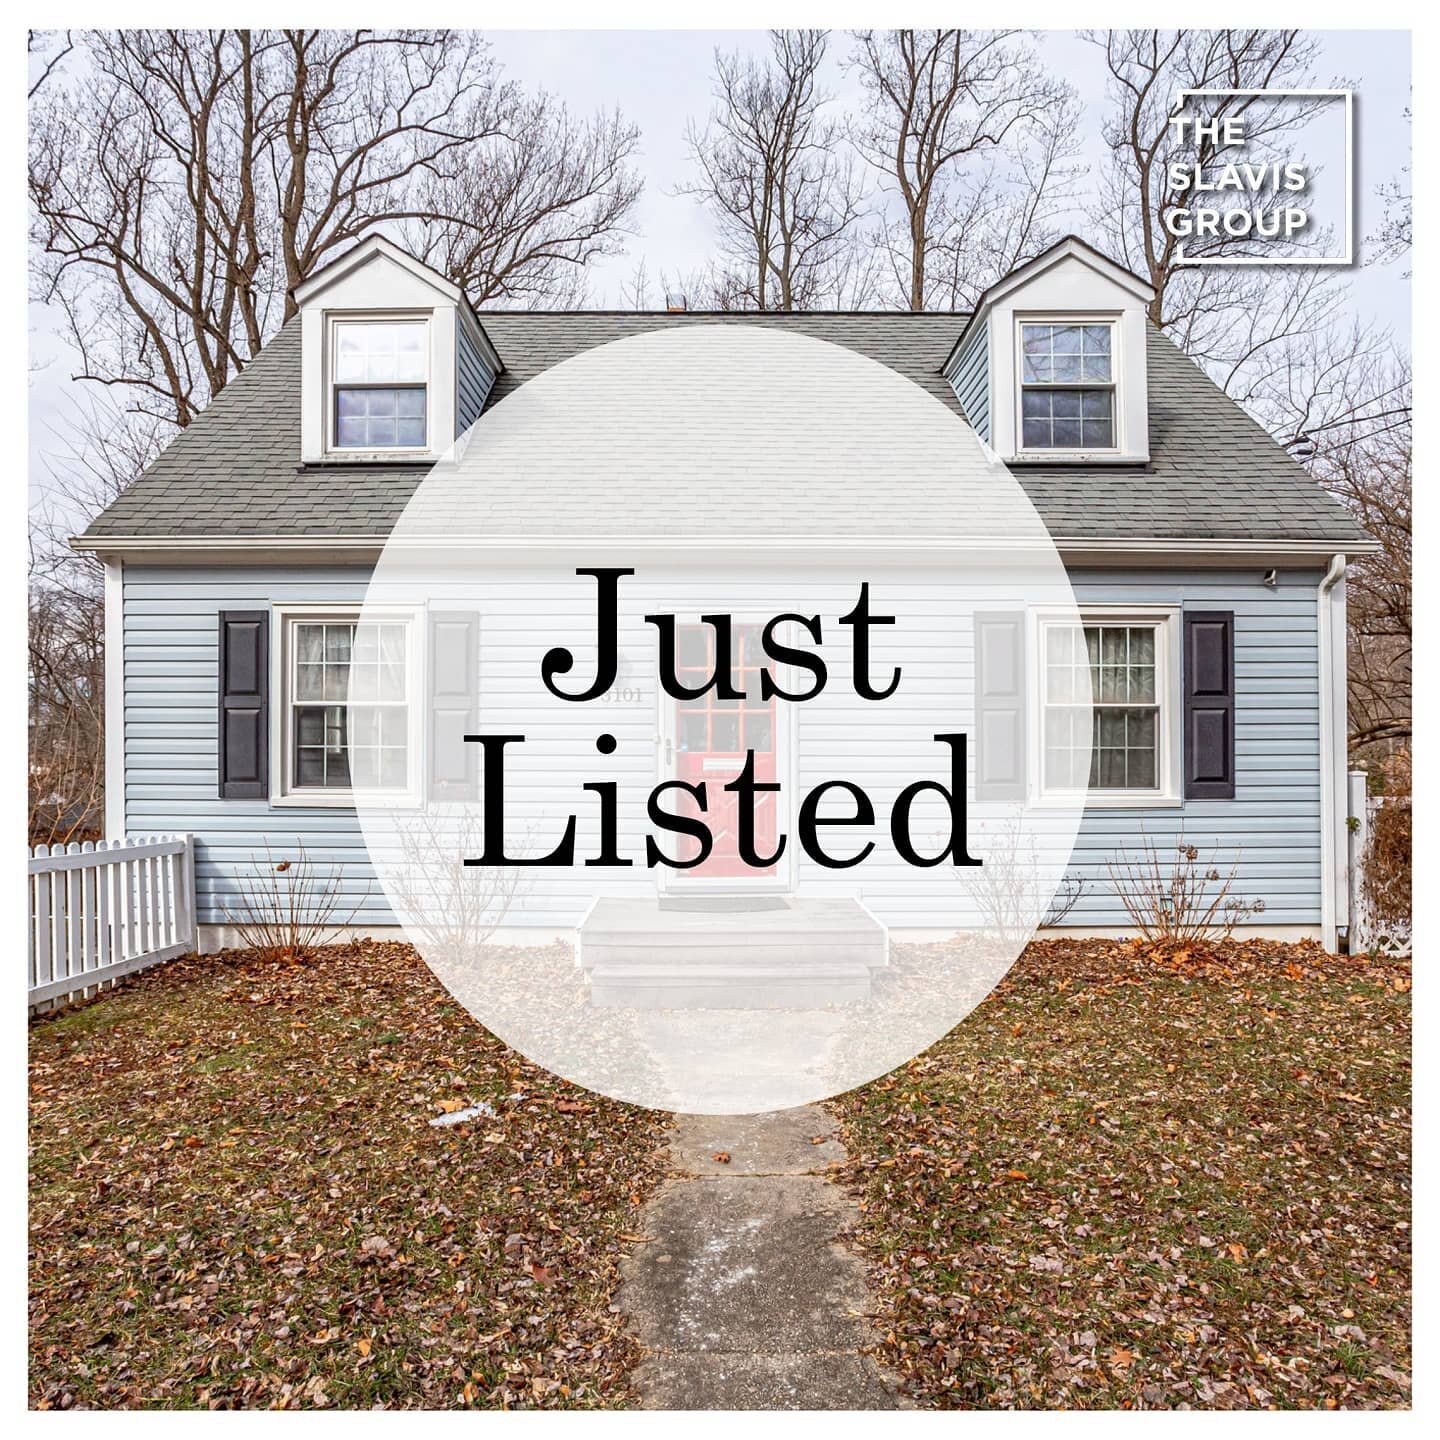 Just Listed in Kensington, MD! Welcome home to 3101 Ferndale St. This home has been beautifully renovated to add two additional full baths and a full bed. The top floor provides a master suite and office space. The main floor boasts two bedrooms, a f